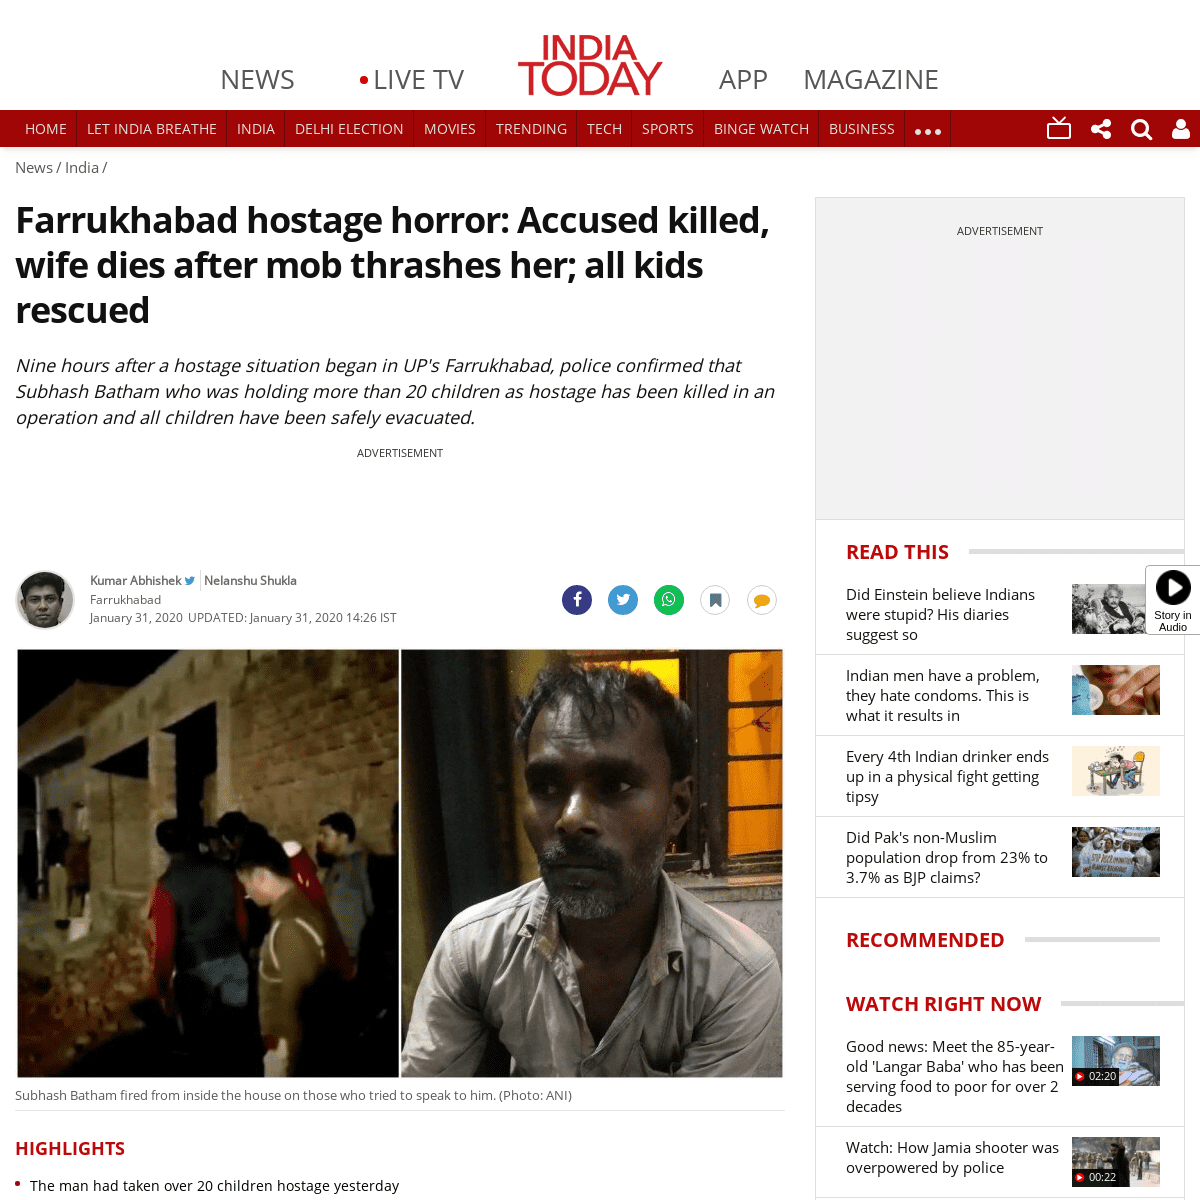 A complete backup of www.indiatoday.in/india/story/farrukhabad-hostage-horror-ends-after-9-hours-accused-killed-all-kids-rescued